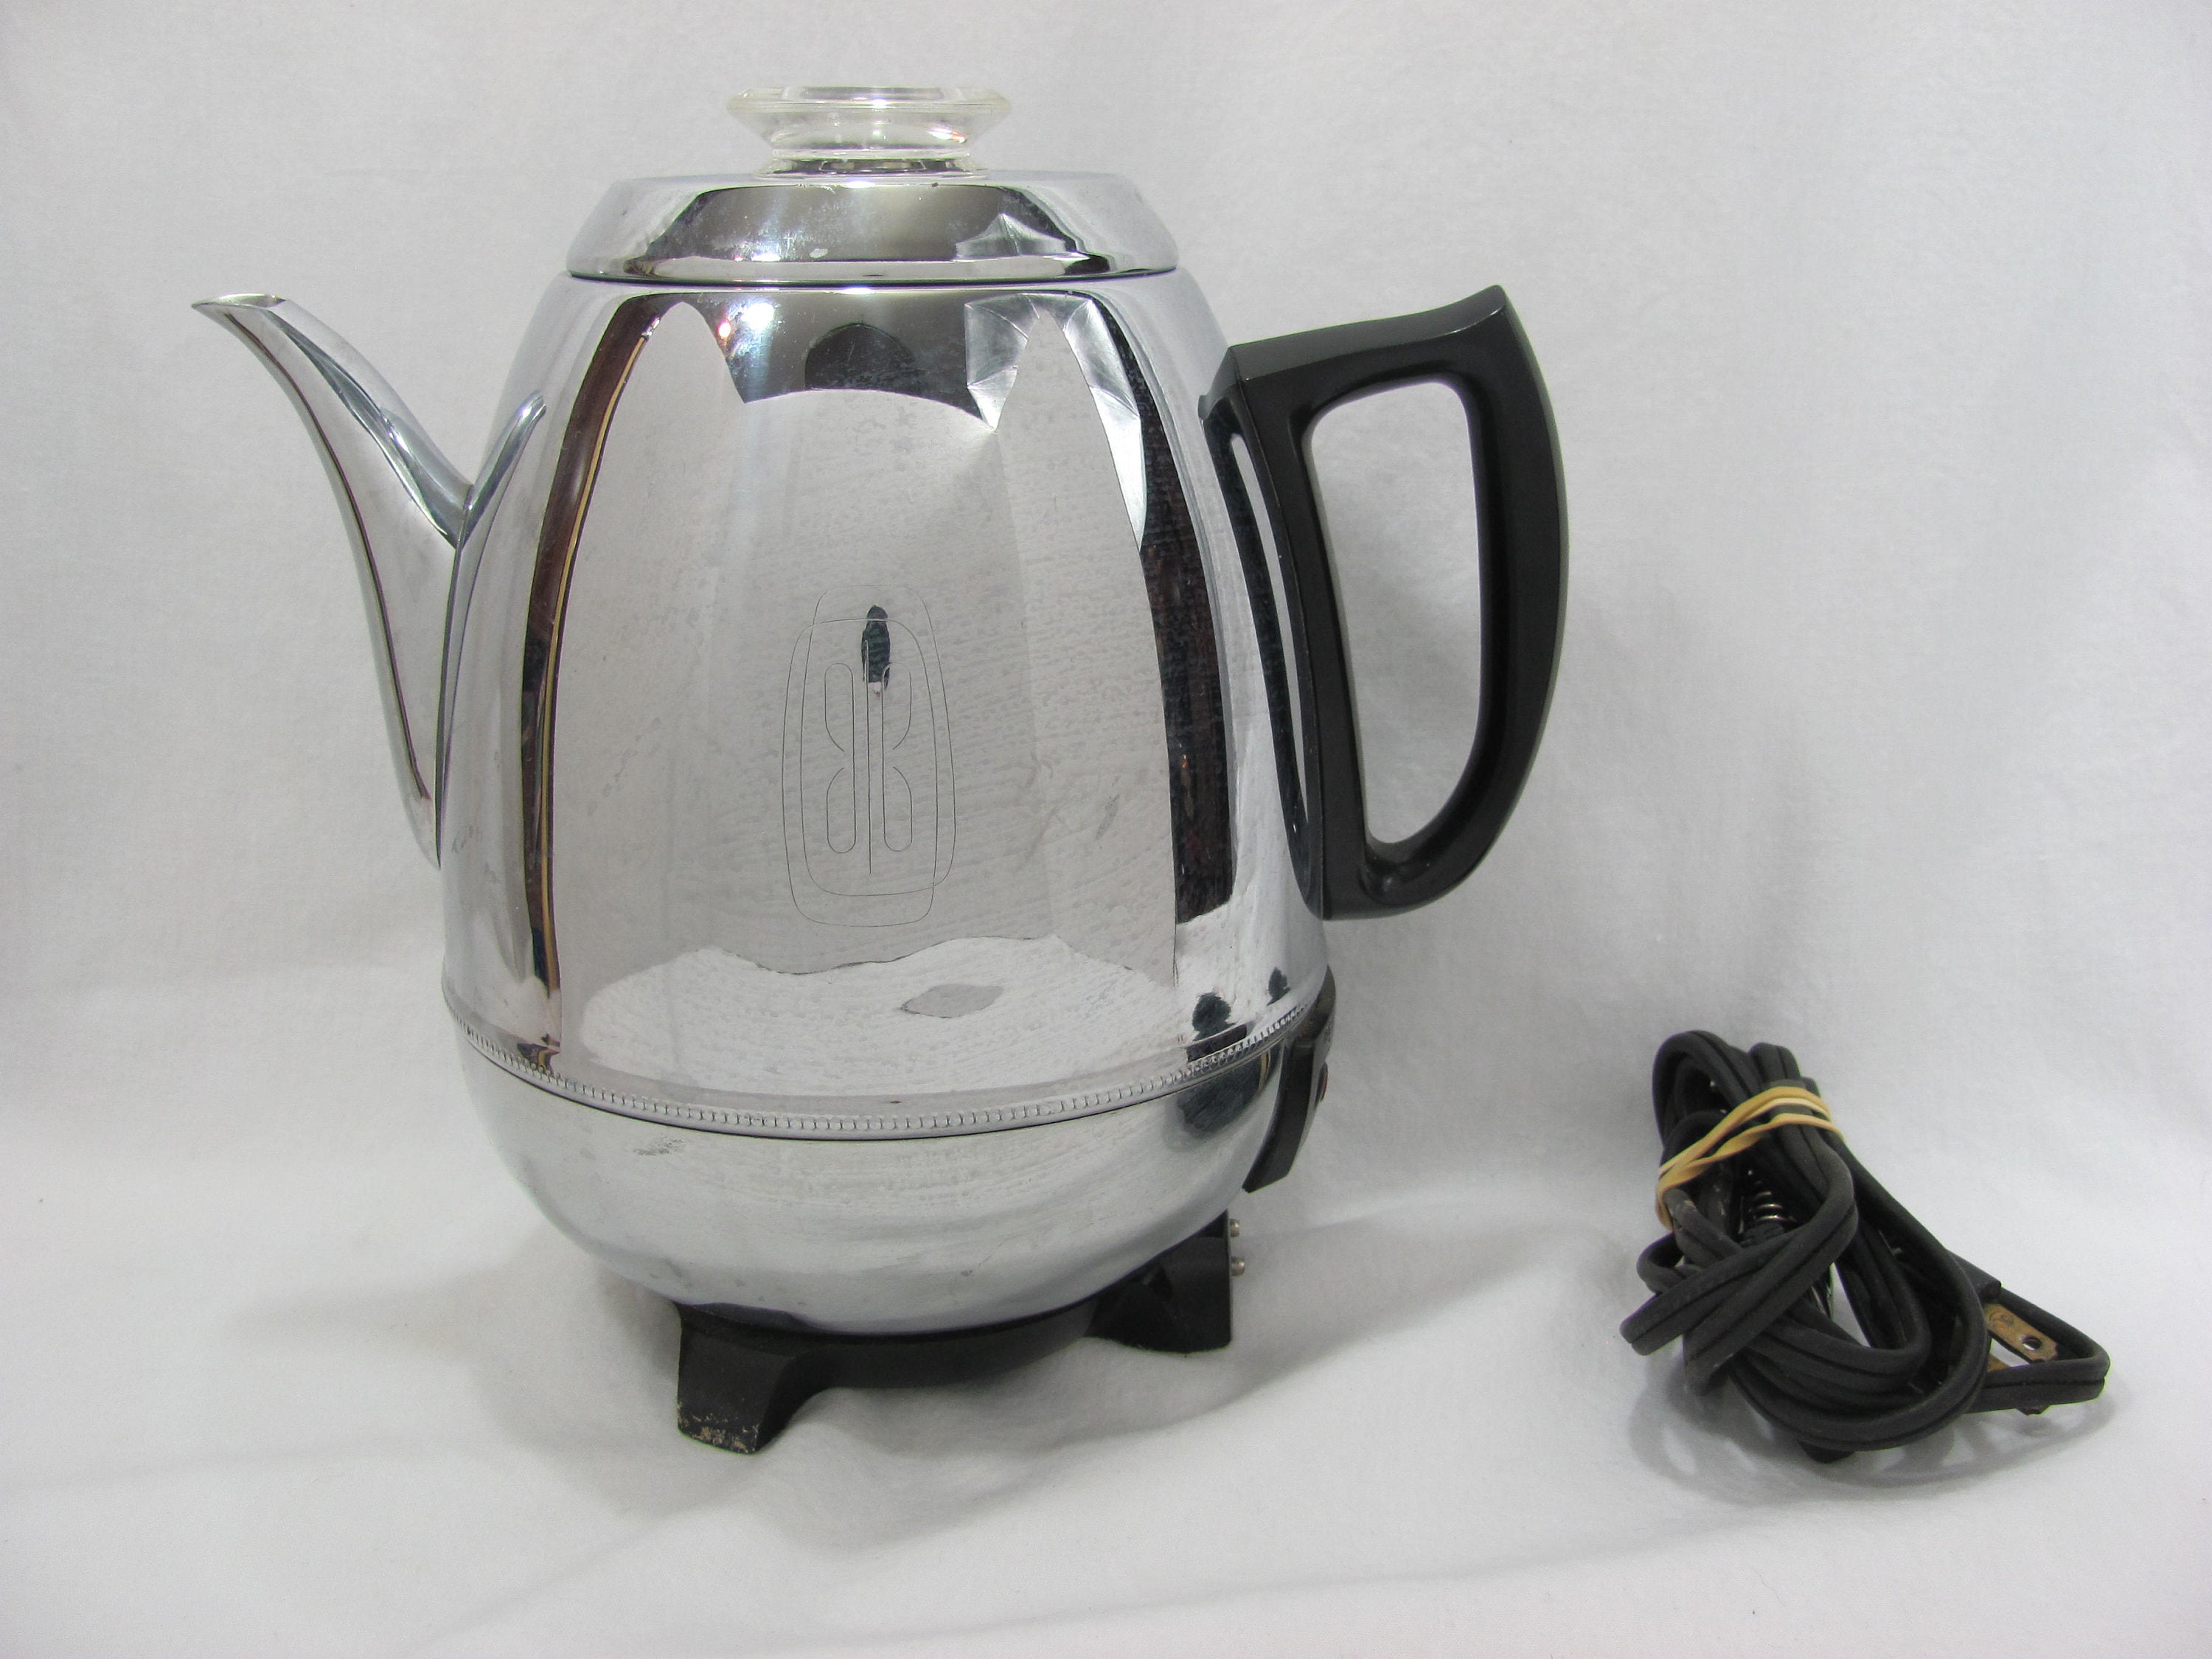 OLD Vintage Automatic Percolator General Electric GE Coffee Maker